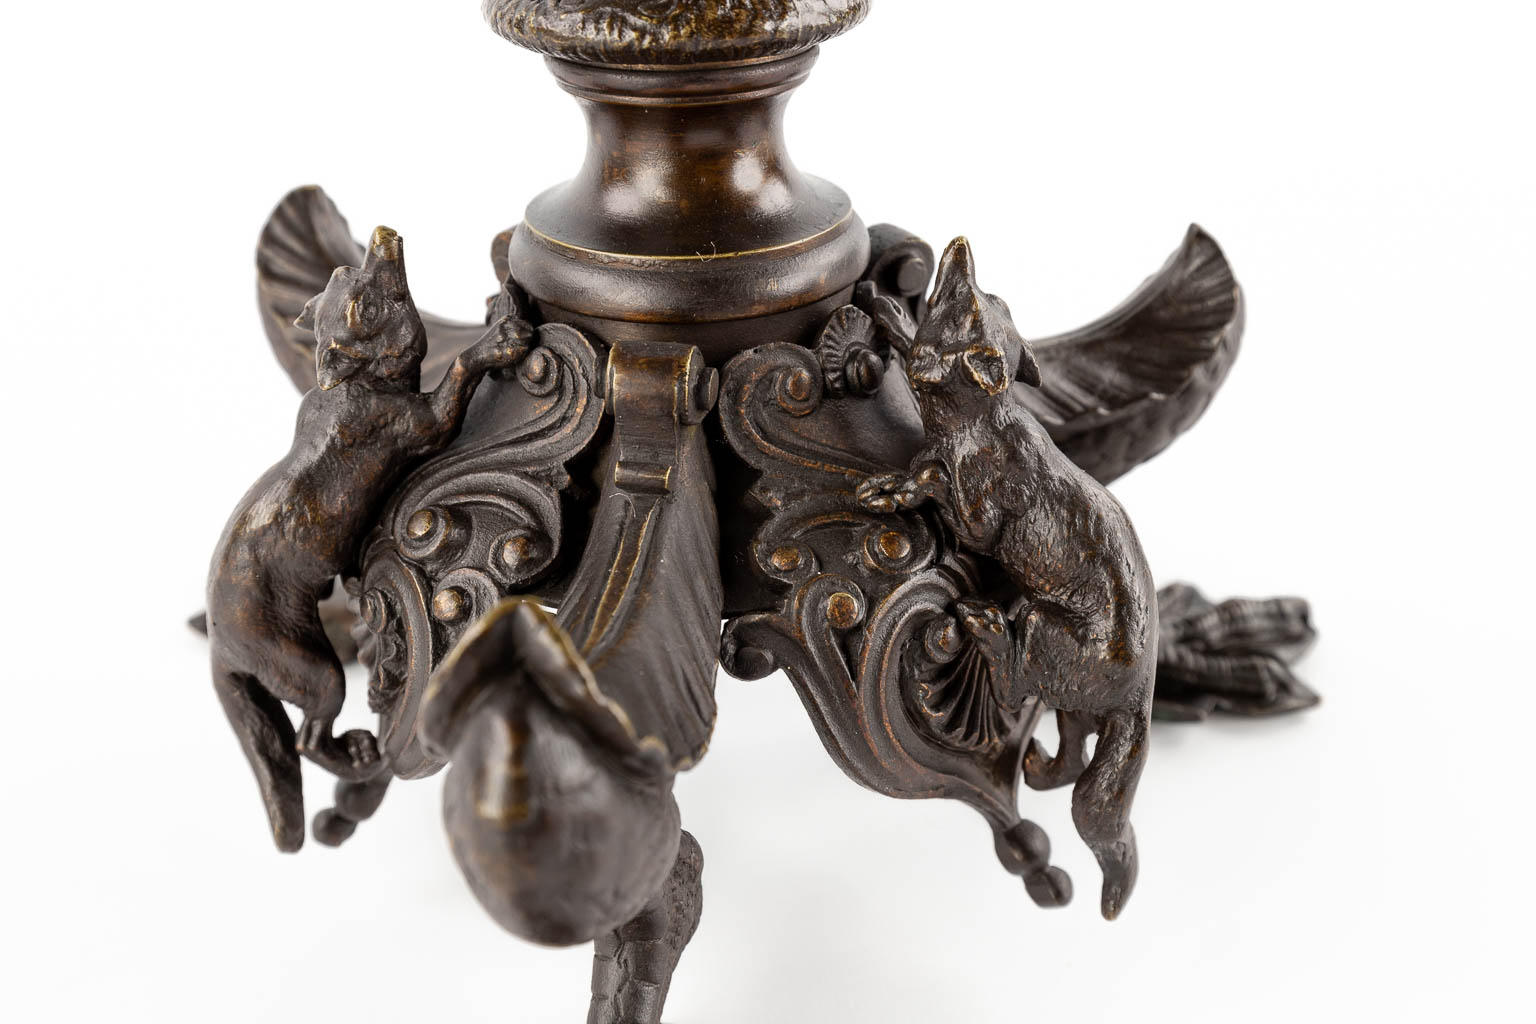 Jules MOIGNIEZ (1835-1894) 'Candelabra with birds and foxes' patinated bronze. (H:72 x D:24 cm)